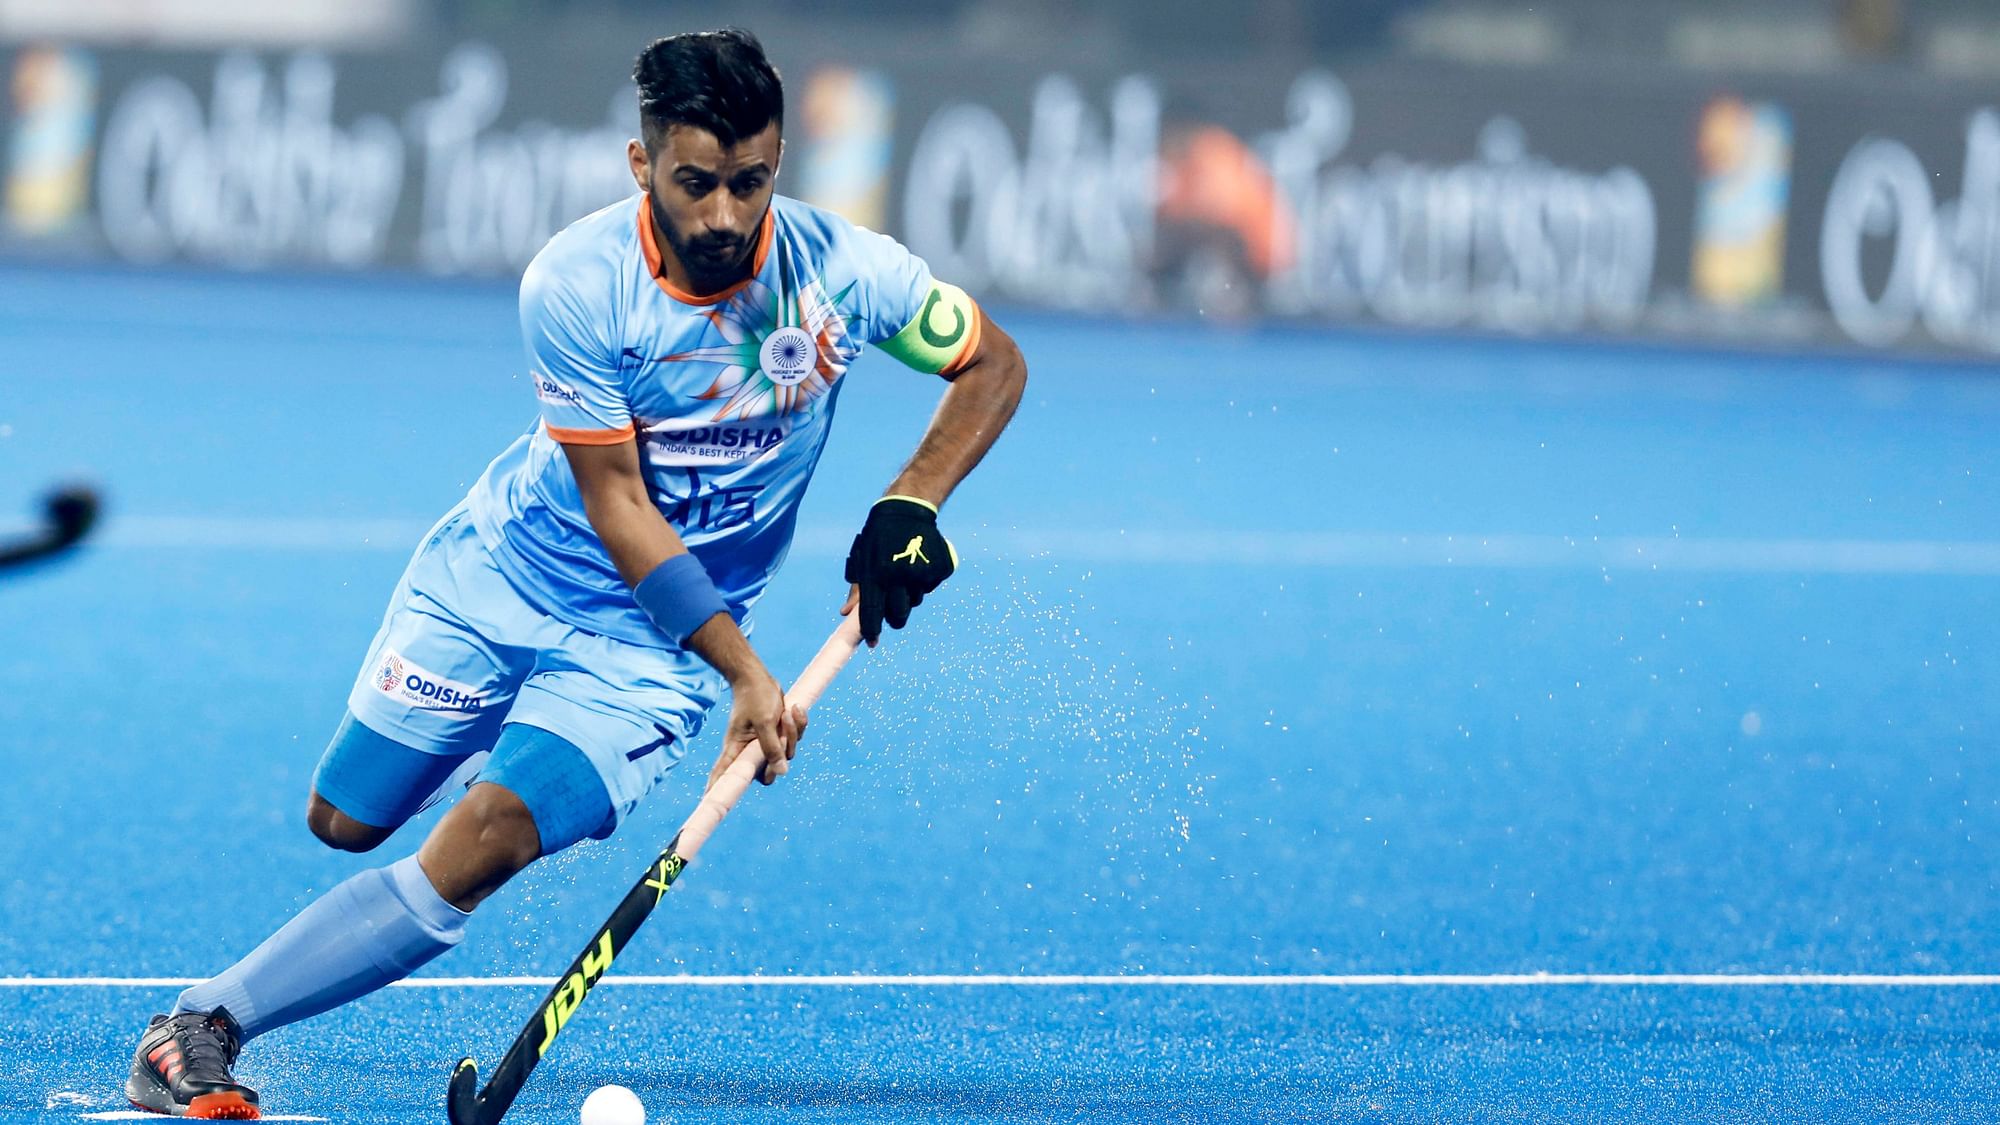 Indian skipper Manpreet Singh has been honoured with the 2018 Player of the Year award by the Asian Hockey Federation.